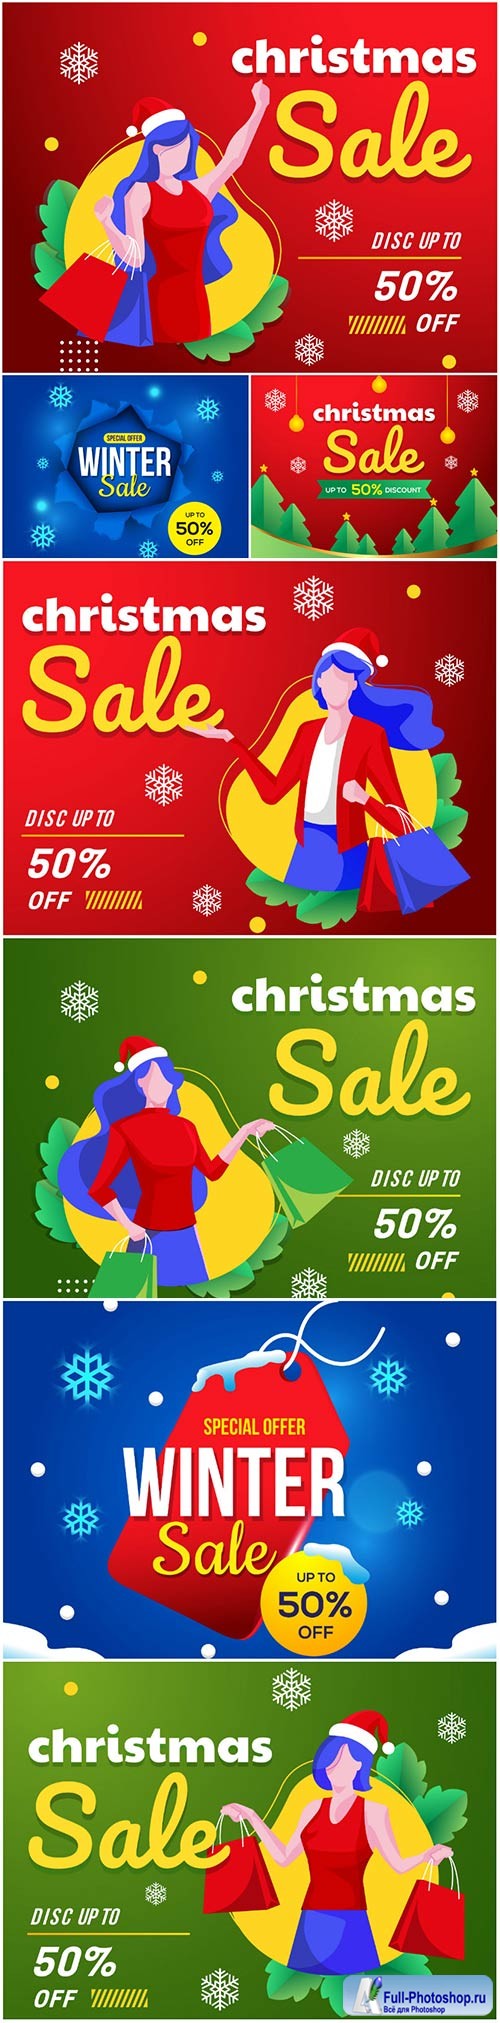 Christmas sale banner with women shopping background